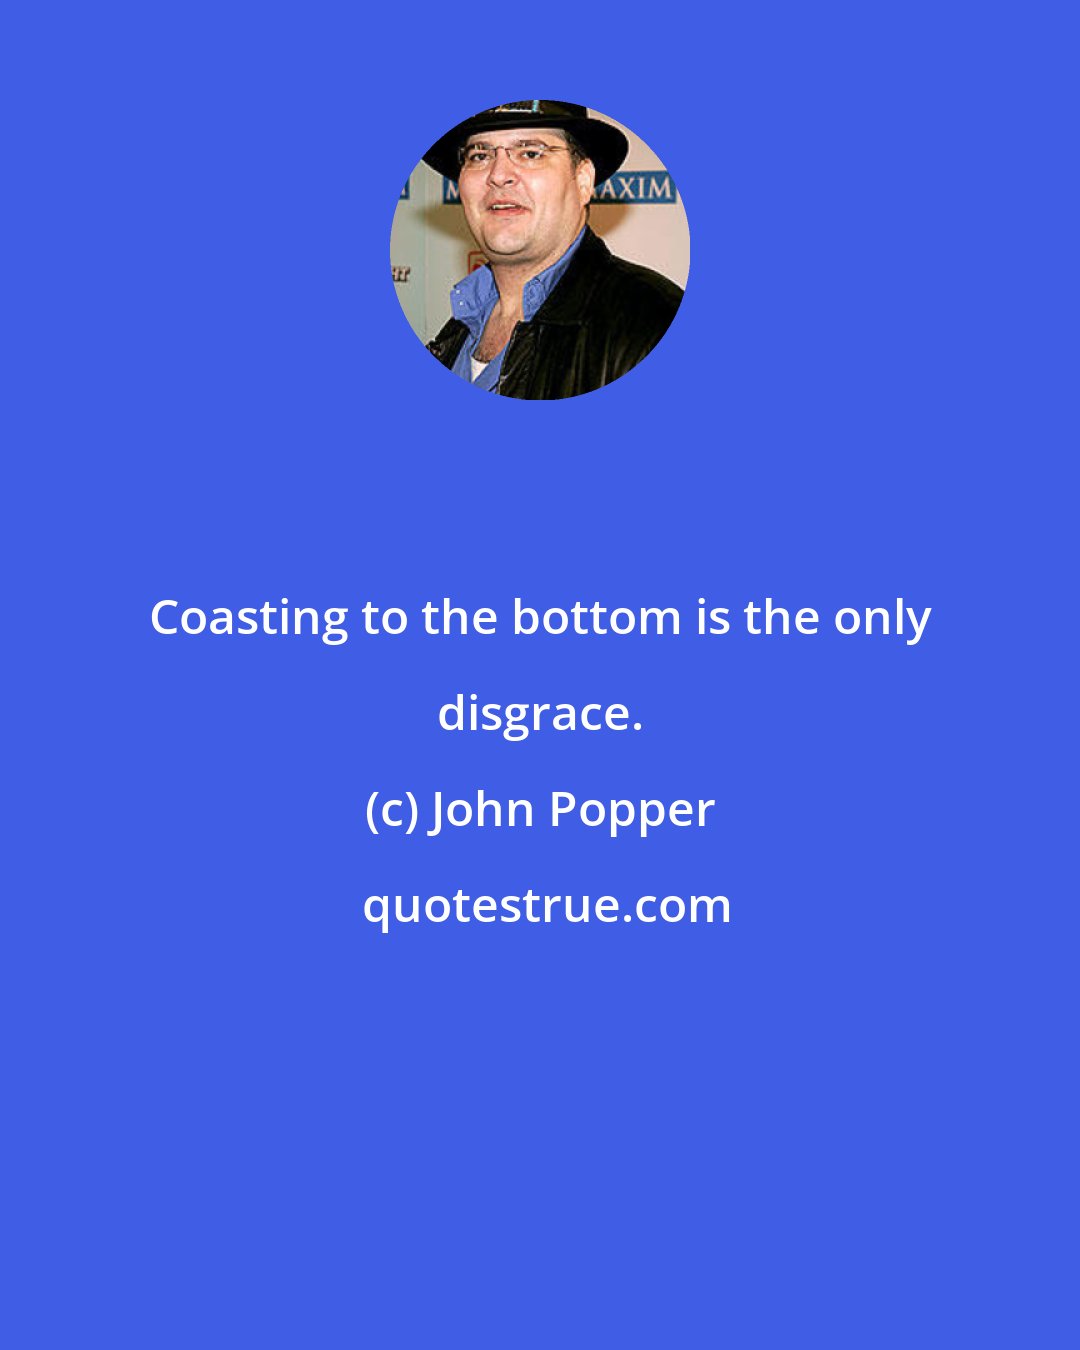 John Popper: Coasting to the bottom is the only disgrace.